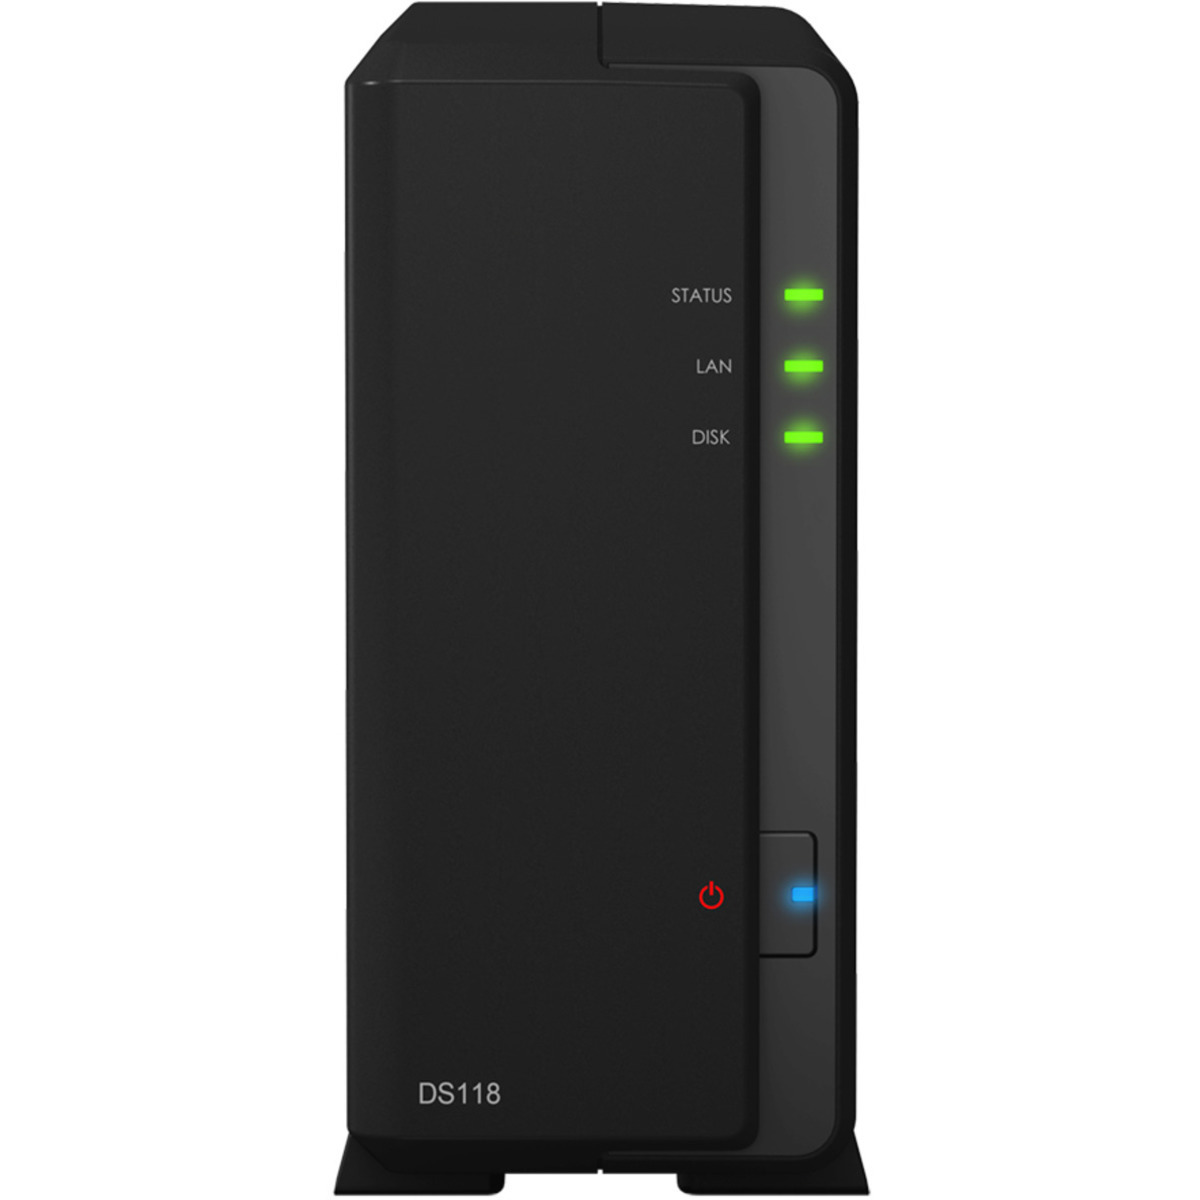 buy $387 Synology DiskStation DS118 6tb Desktop NAS - Network Attached Storage Device 1x6000gb Western Digital Blue WD60EZAZ 3.5 5400rpm SATA 6Gb/s HDD CONSUMER Class Drives Installed - Burn-In Tested - nas headquarters buy network attached storage server device das new raid-5 free shipping usa christmas new year holiday sale DiskStation DS118